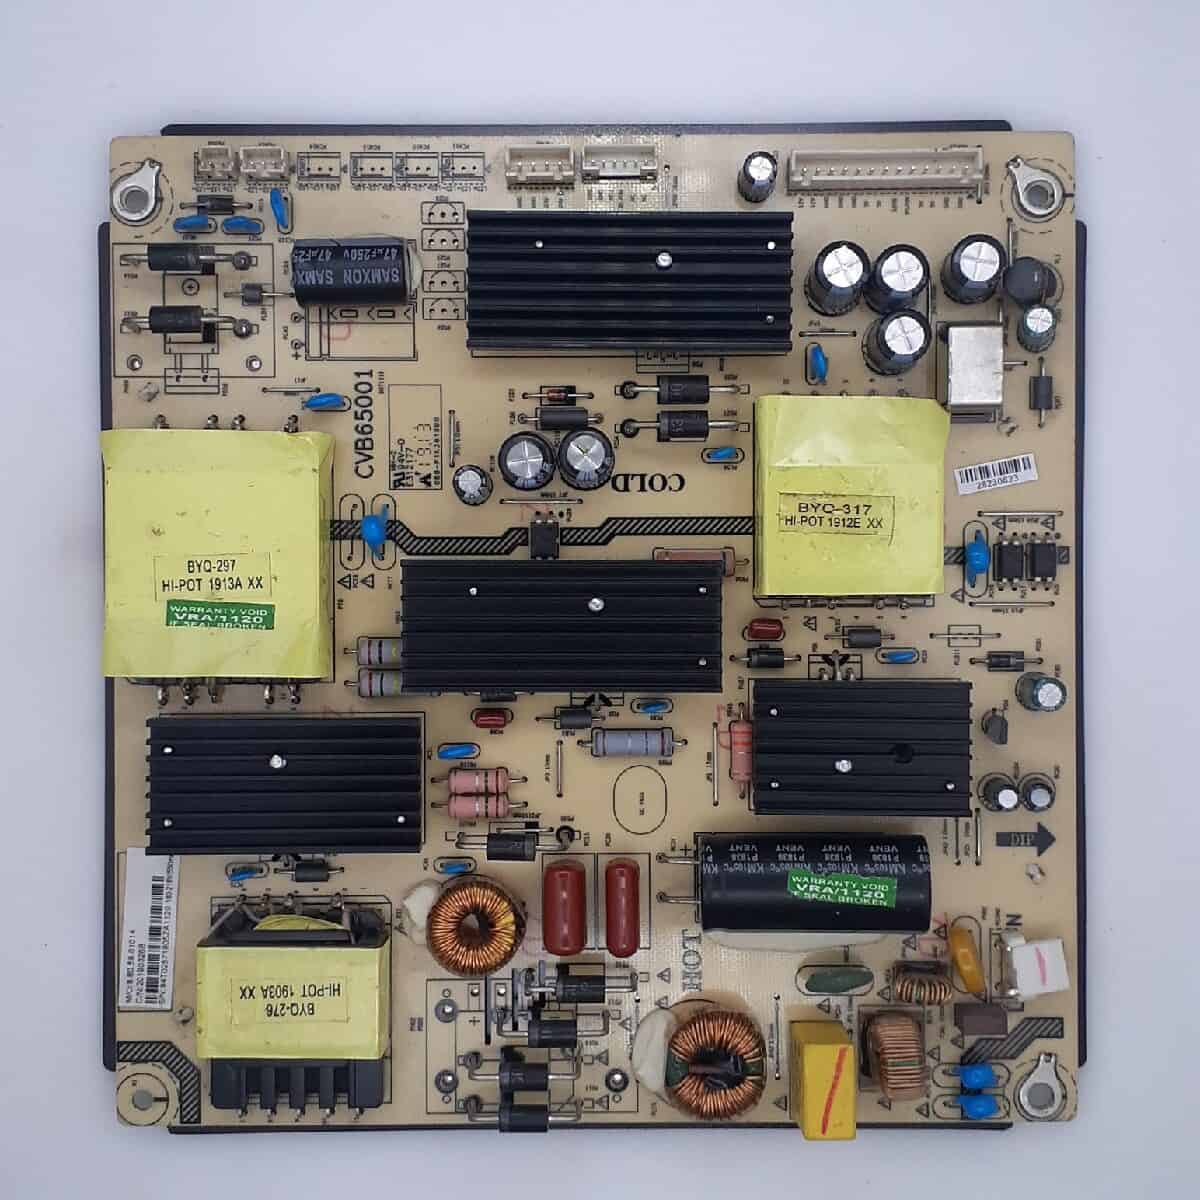 CREL-7347 CROMA POWER SUPPLY BOARD FOR LED TV 3nos